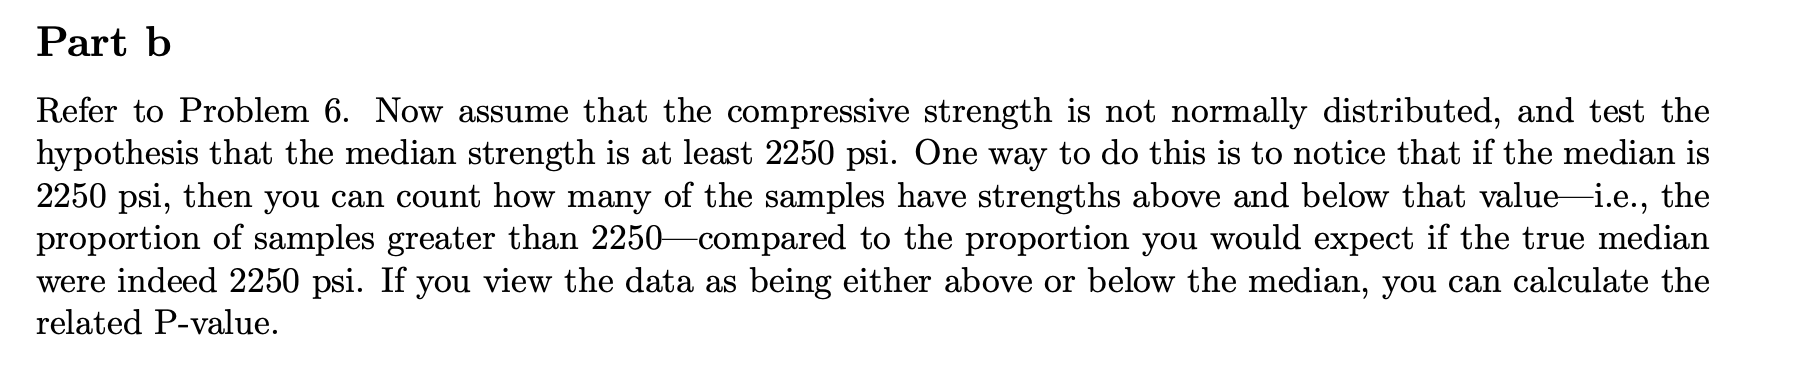 Part b
Refer to Problem 6. Now assume that the compressive strength is not normally distributed, and test the
hypothesis that the median strength is at least 2250 psi. One way to do this is to notice that if the median is
2250 psi, then you can count how many of the samples have strengths above and below that value i.e., the
proportion of samples greater than 2250-compared to the proportion you would expect if the true median
were indeed 2250 psi. If you view the data as being either above or below the median, you can calculate the
related P-value.
